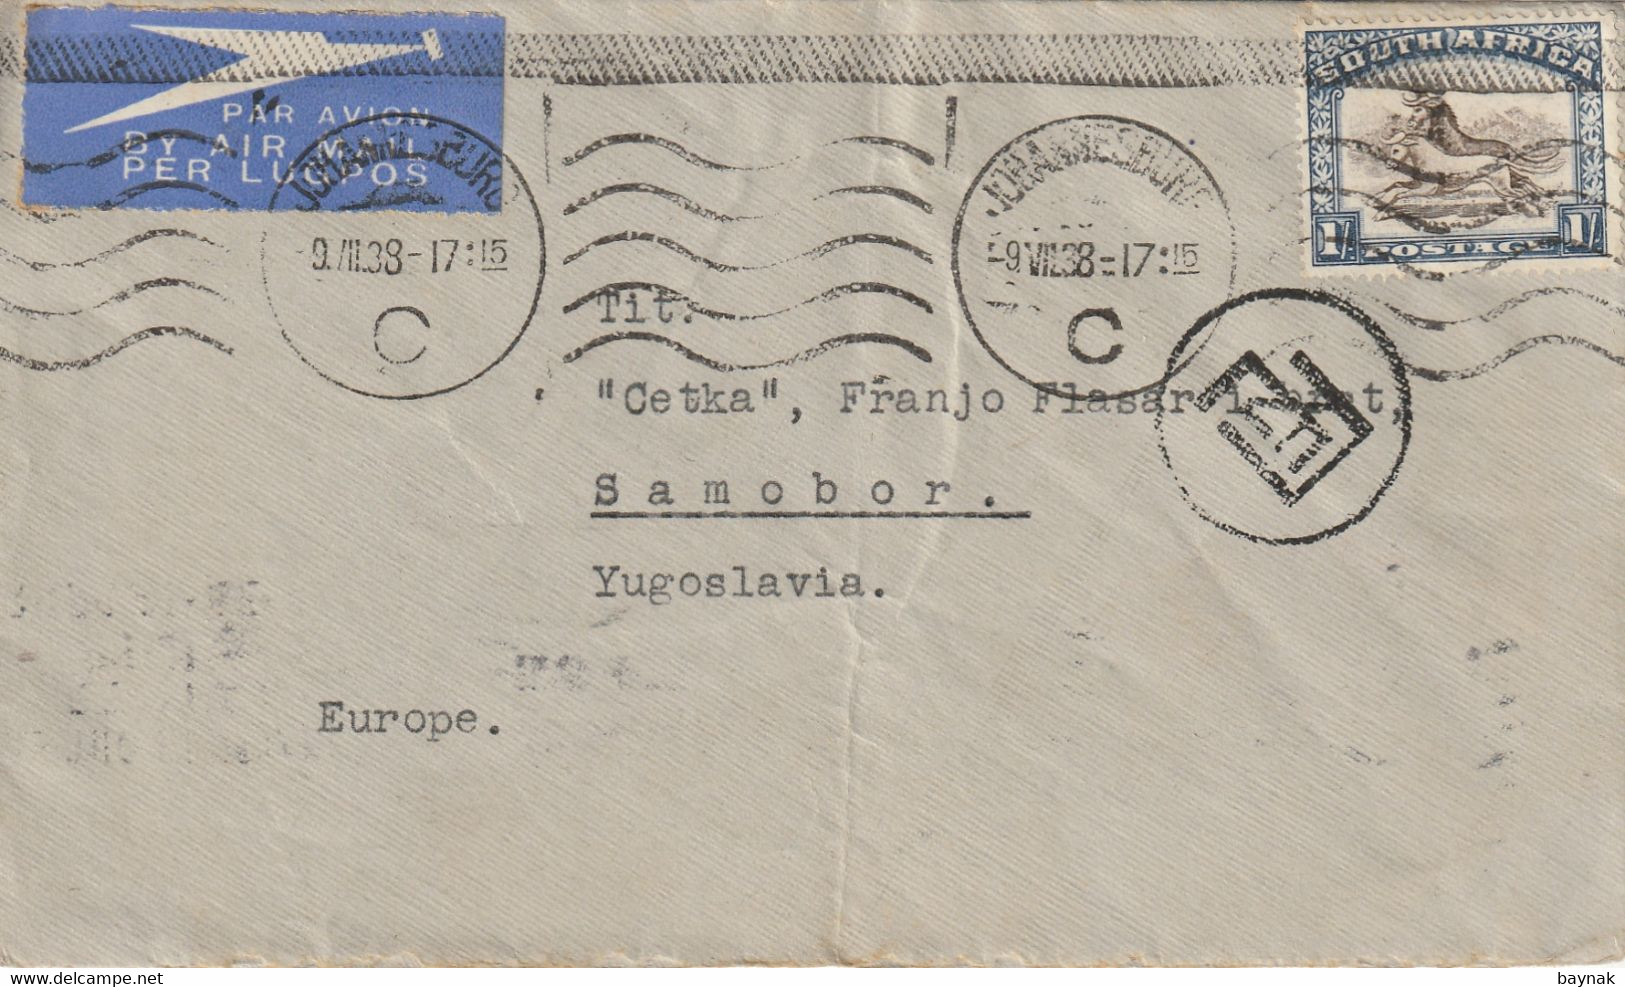 SOUTH   AFRICA  --  BRIEF  --   BY AIR MAIL  --   1938  --  JOHANNESBURG  TO ZAGREB, CROATIA - Airmail